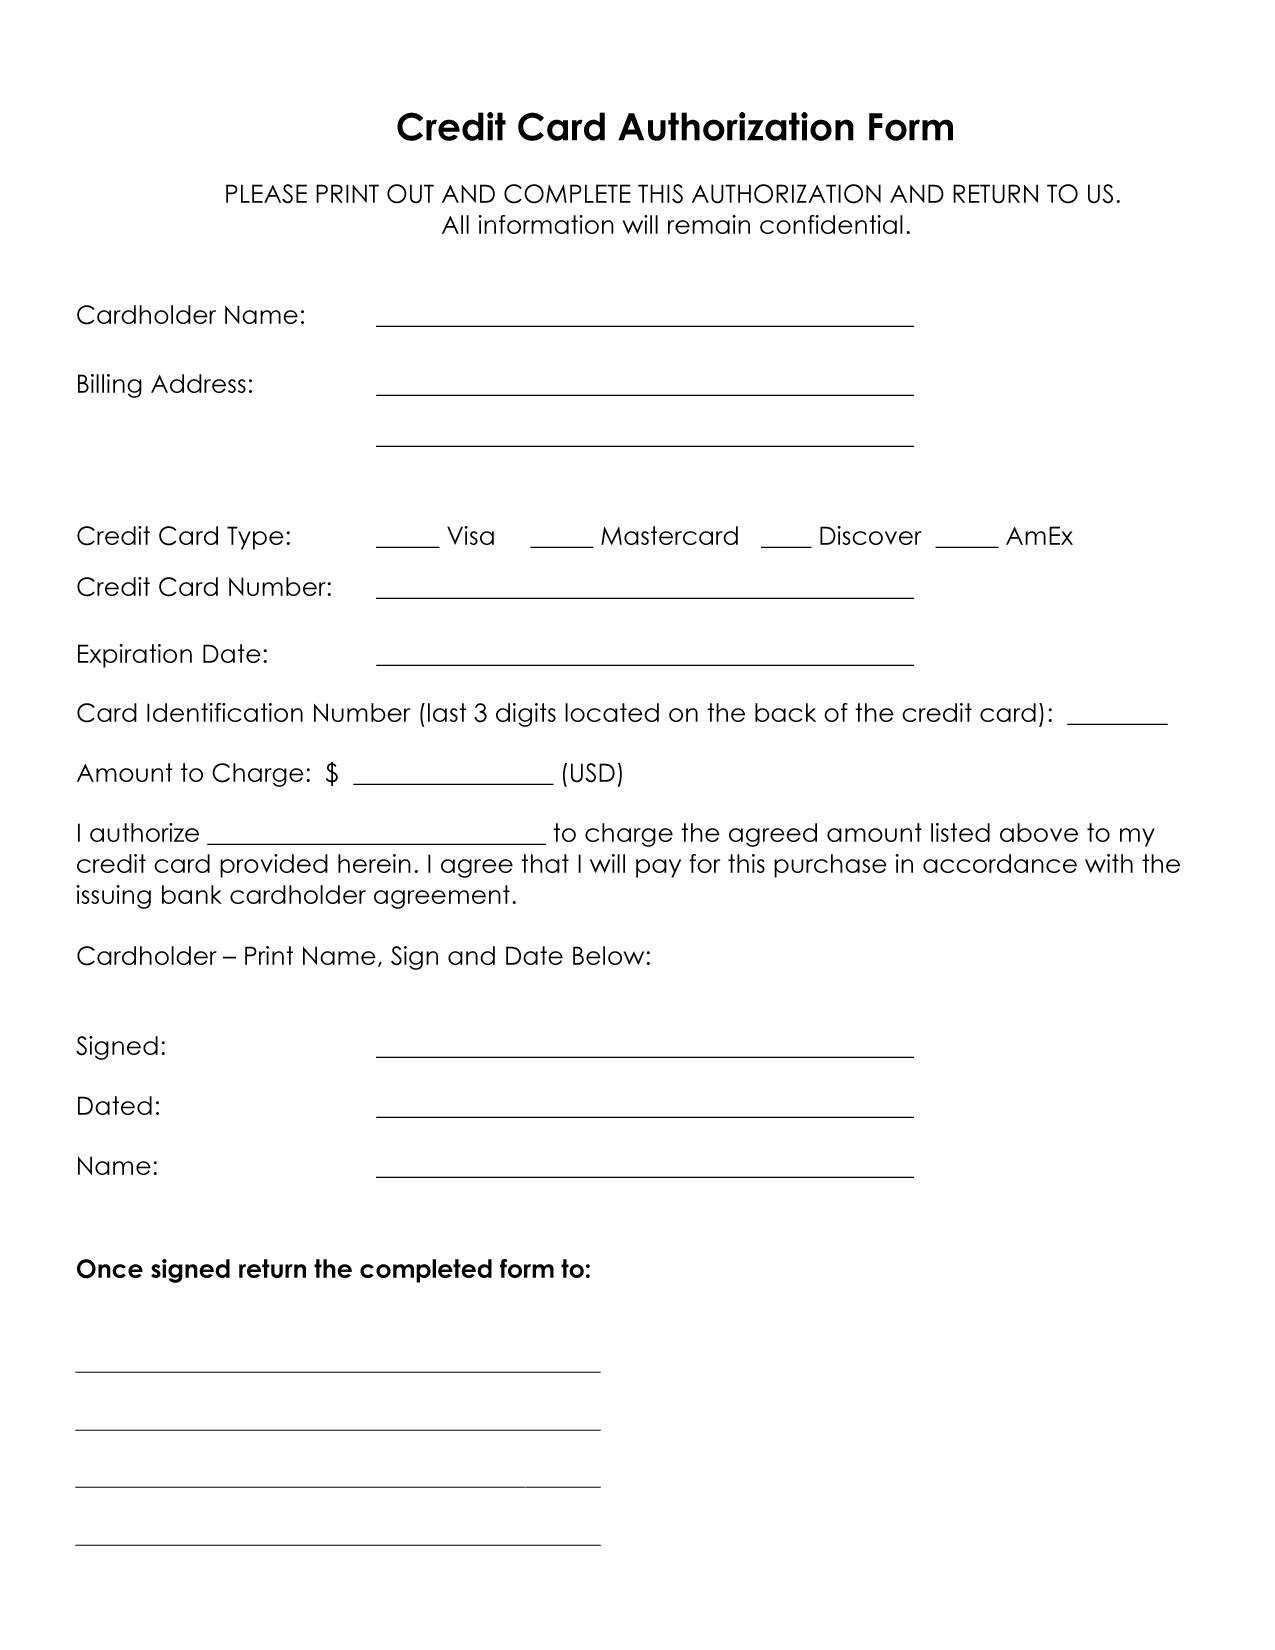 Credit Card Payment Form Word – Oflu.bntl With Regard To Credit Card Billing Authorization Form Template